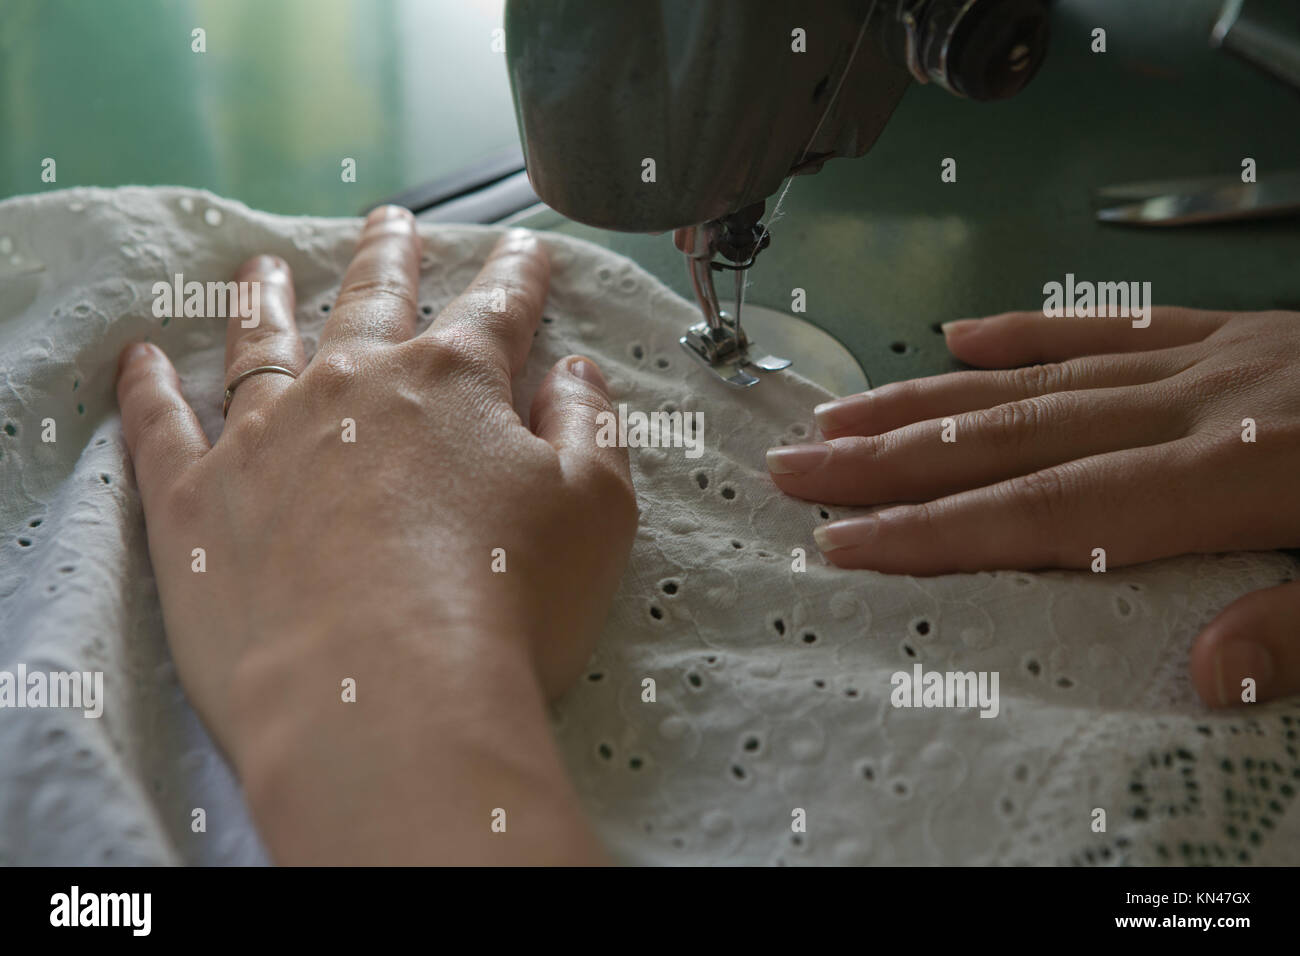 Hands of a dressmaker supporting a cloth while sewing on a sewing machine, Spain. Stock Photo